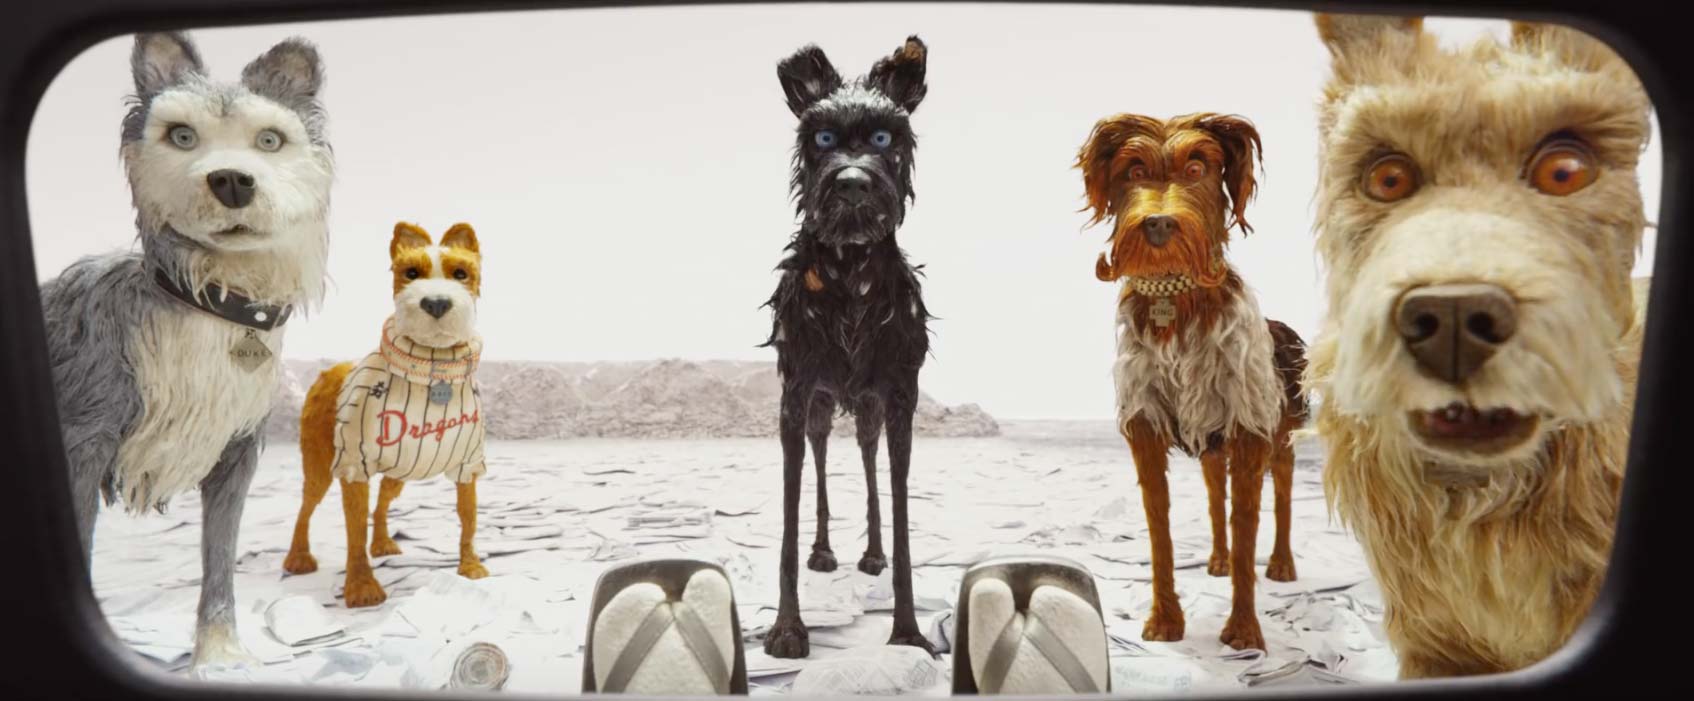 Isle of Dogs de Wes Anderson  (8)